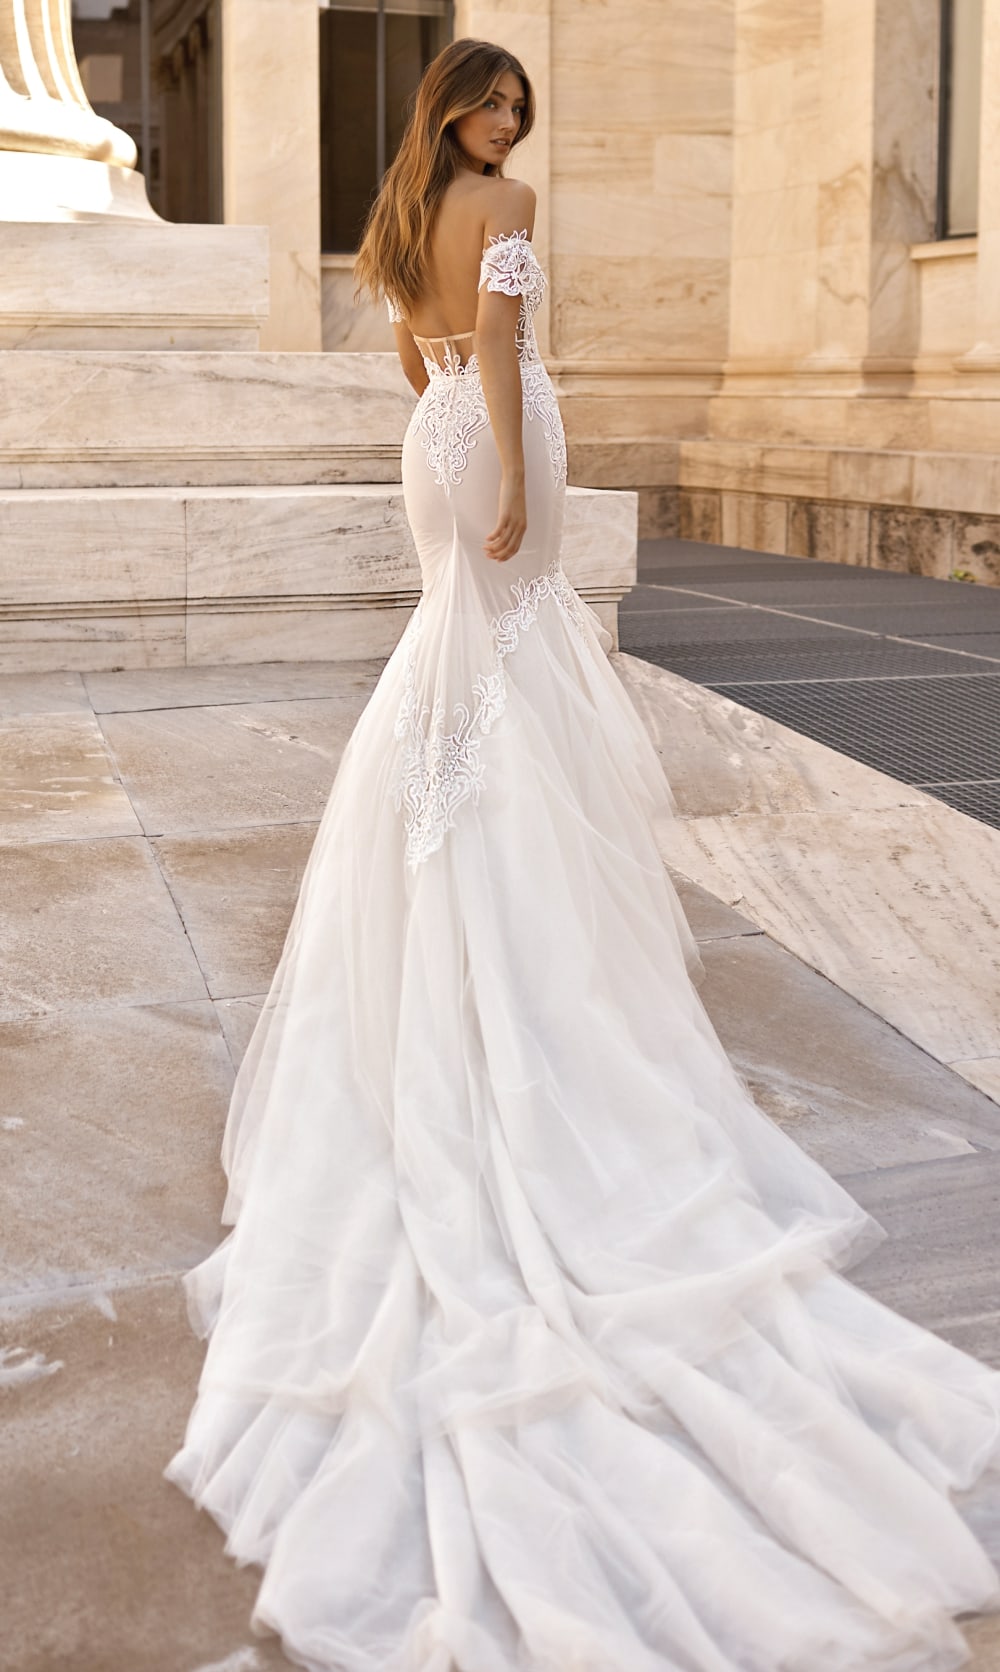 BERTA Wedding Dresses 2019 Athens Collection - Dress for the Wedding